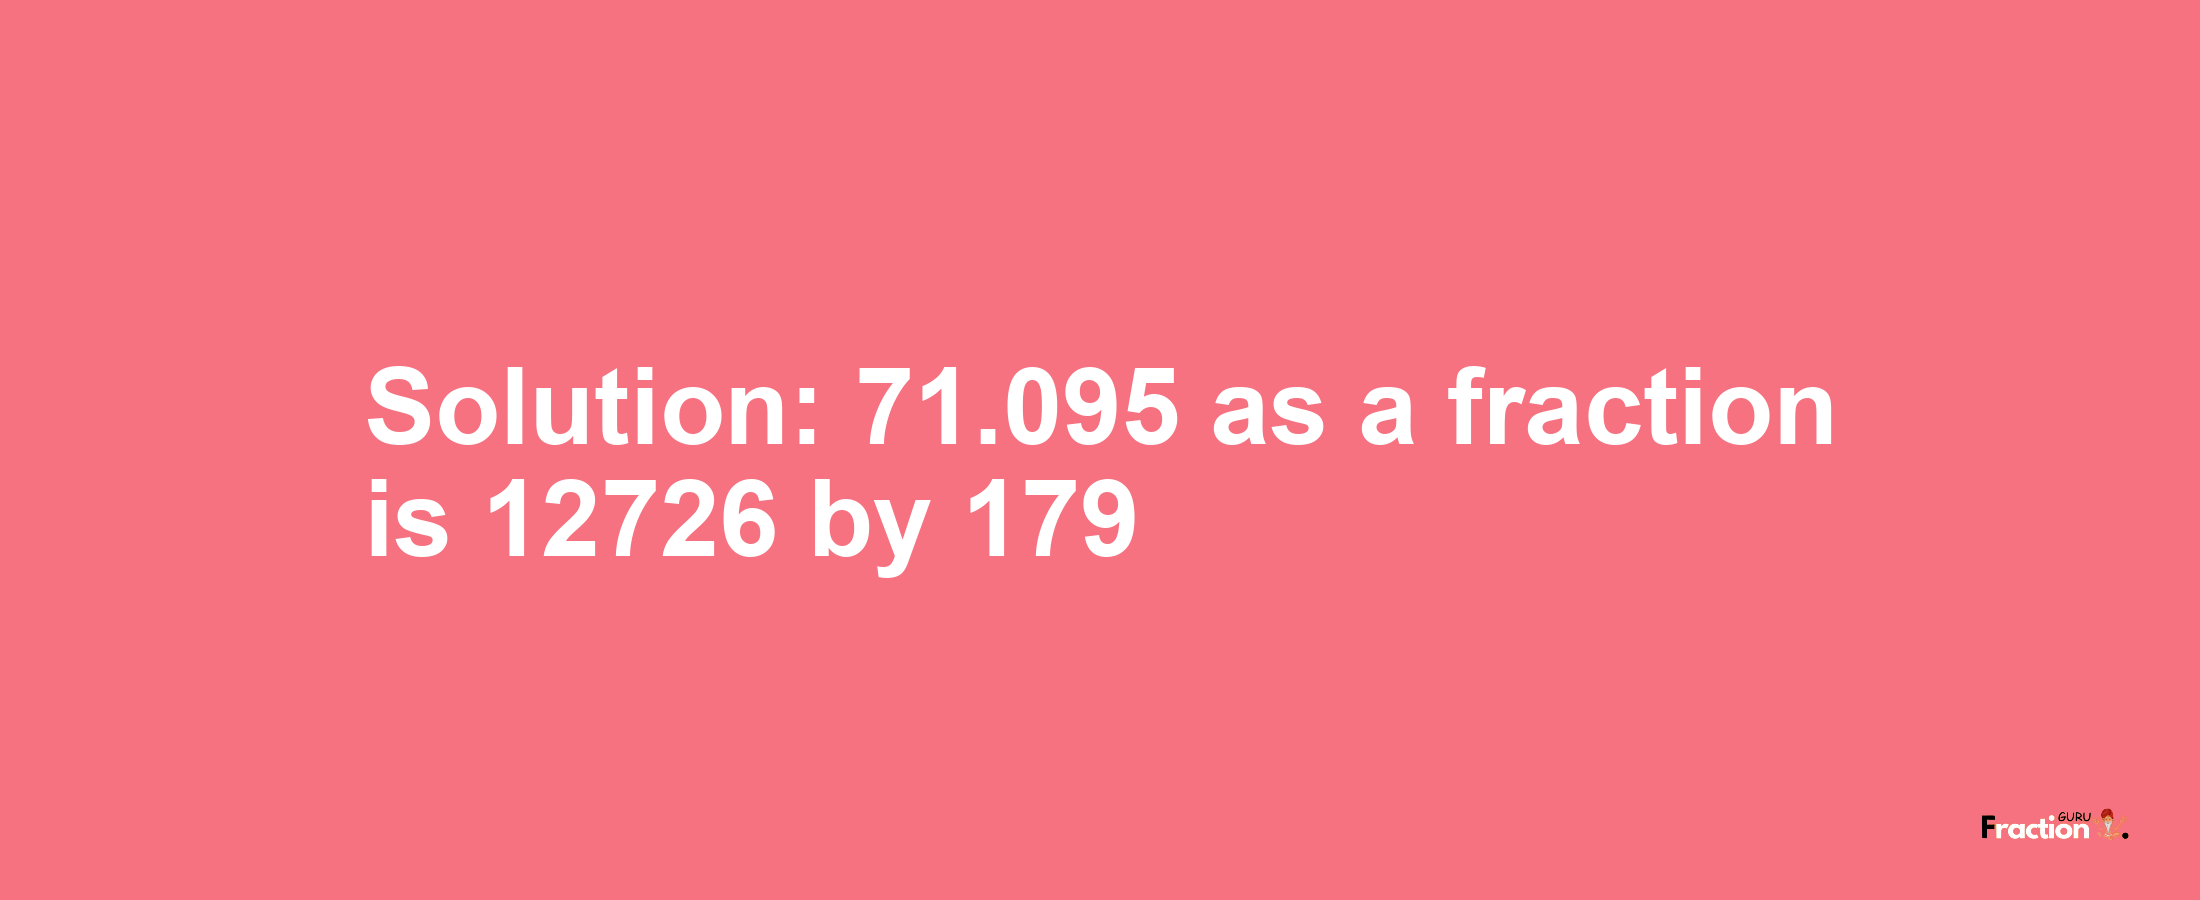 Solution:71.095 as a fraction is 12726/179